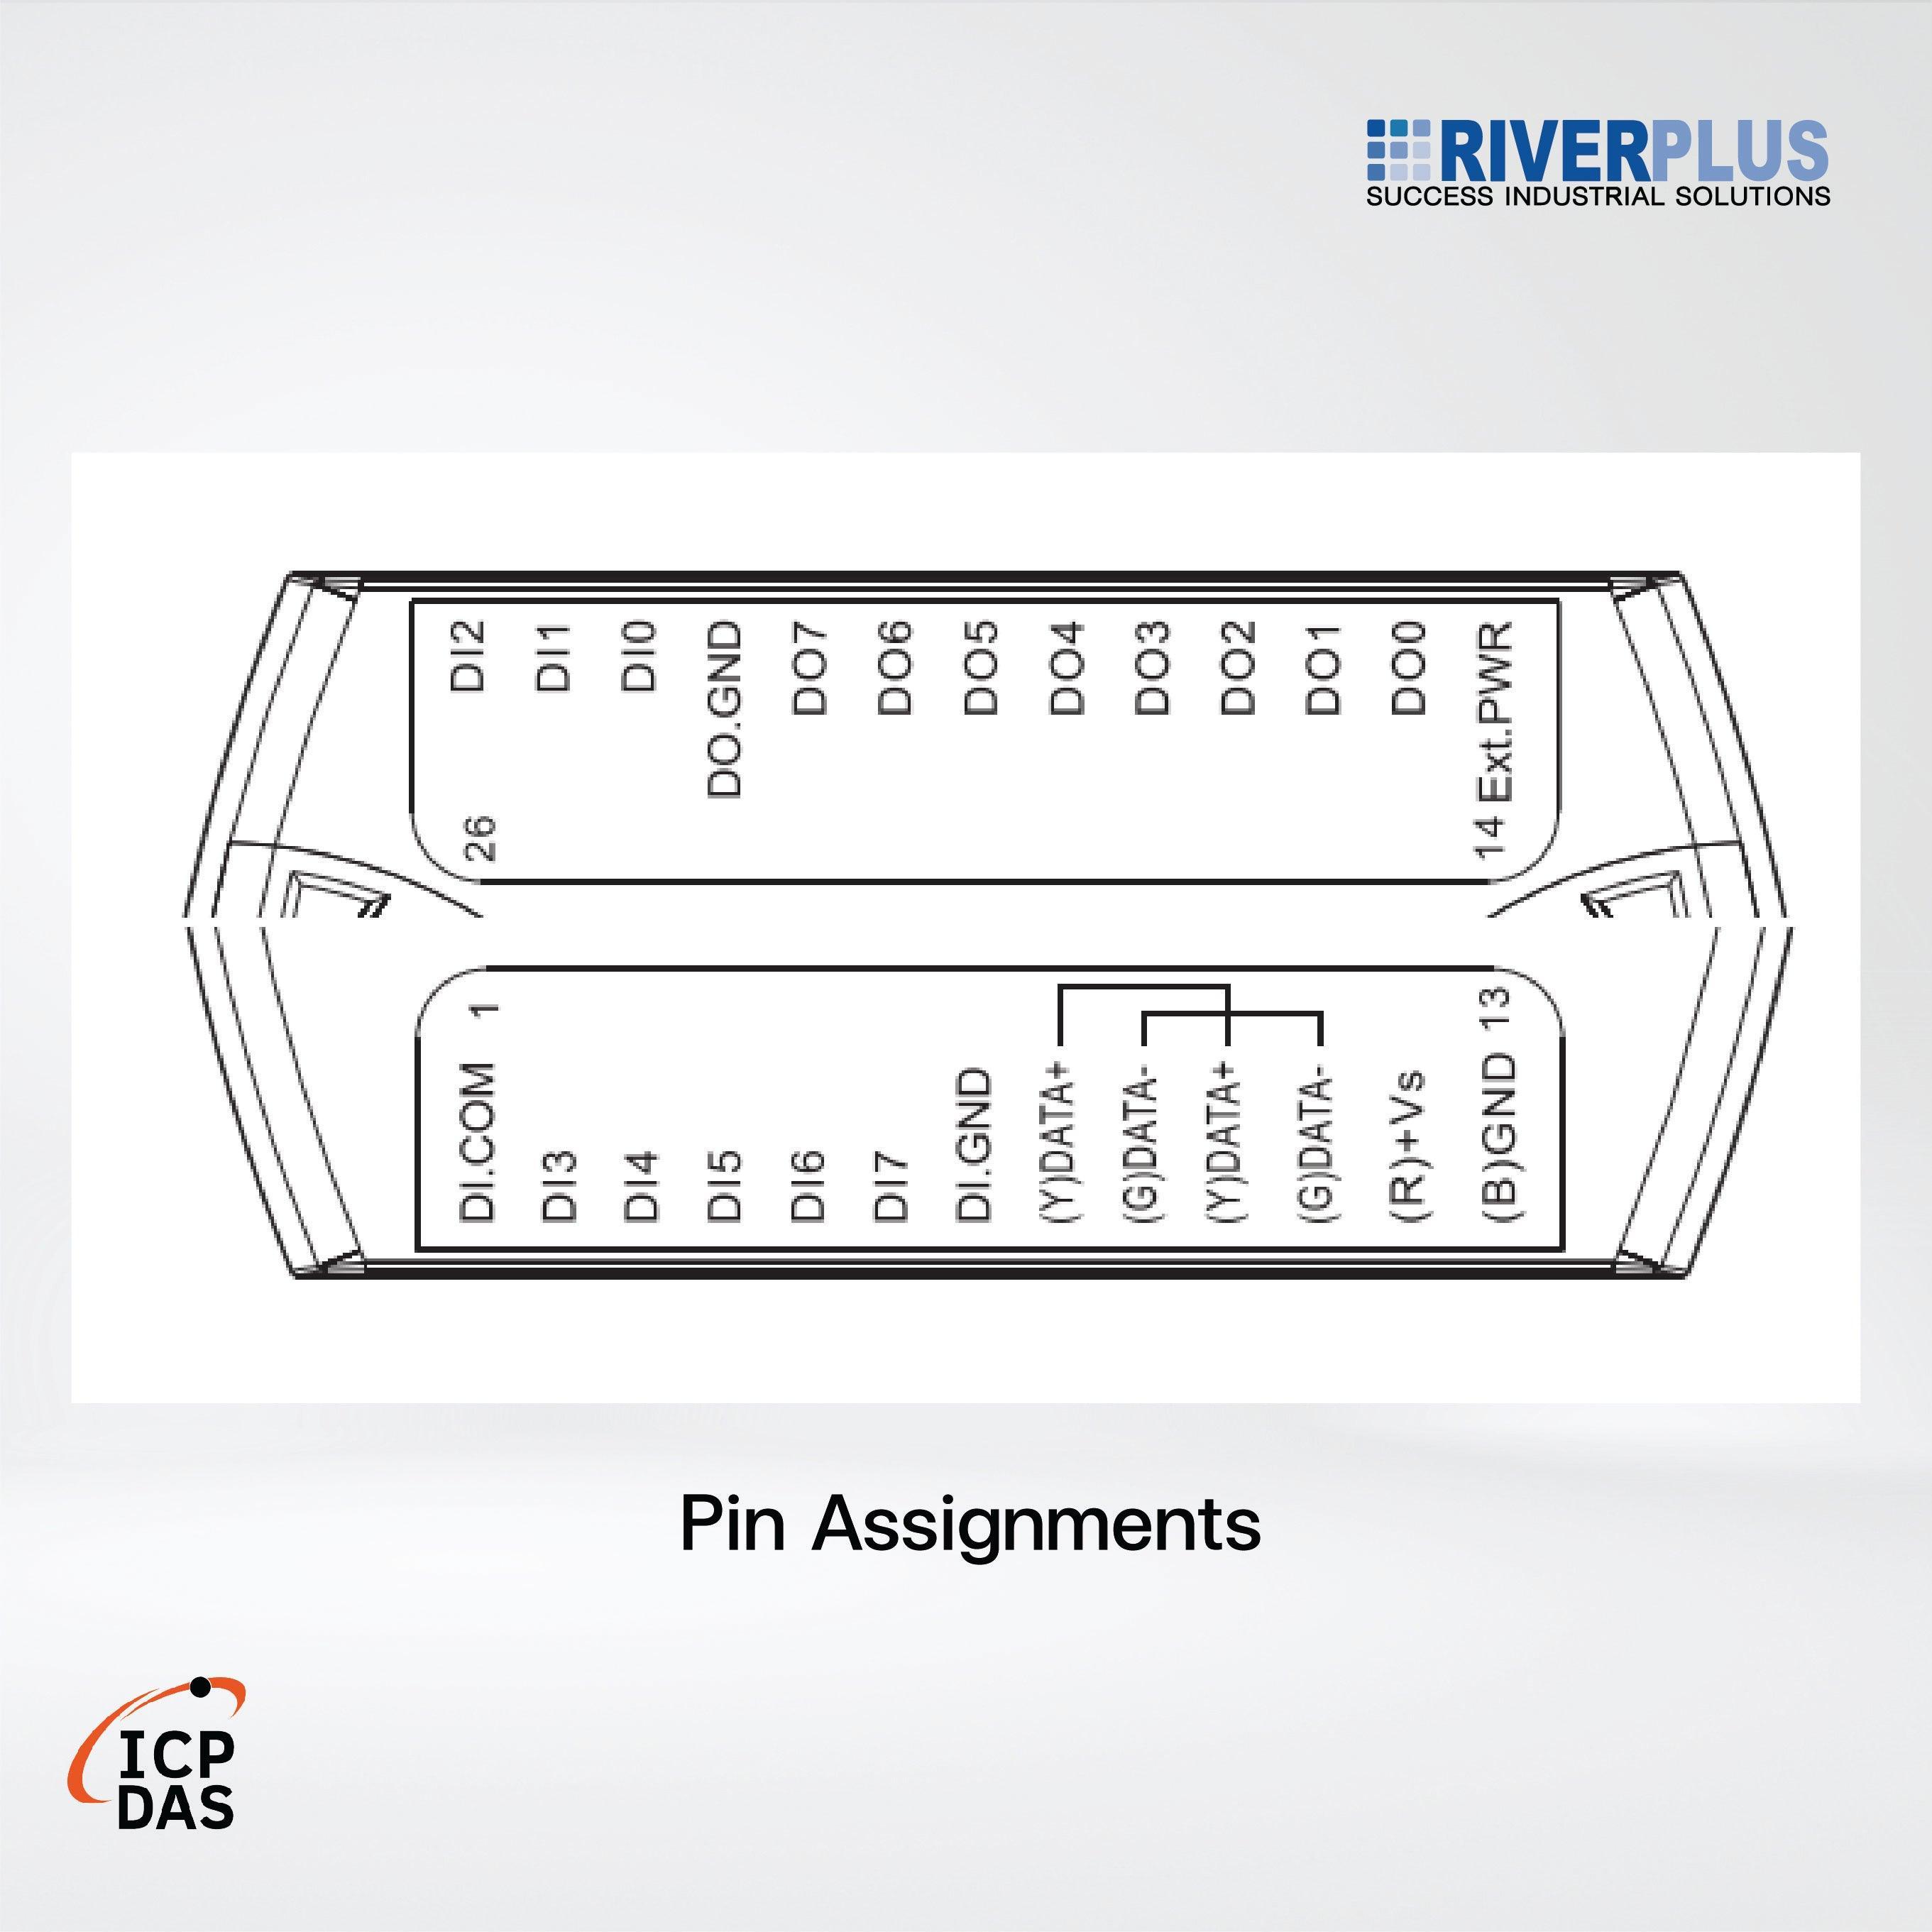 M-7055-G 8-ch Isolated (Dry, Wet) DI and 8-ch Isolated DO Module - Riverplus